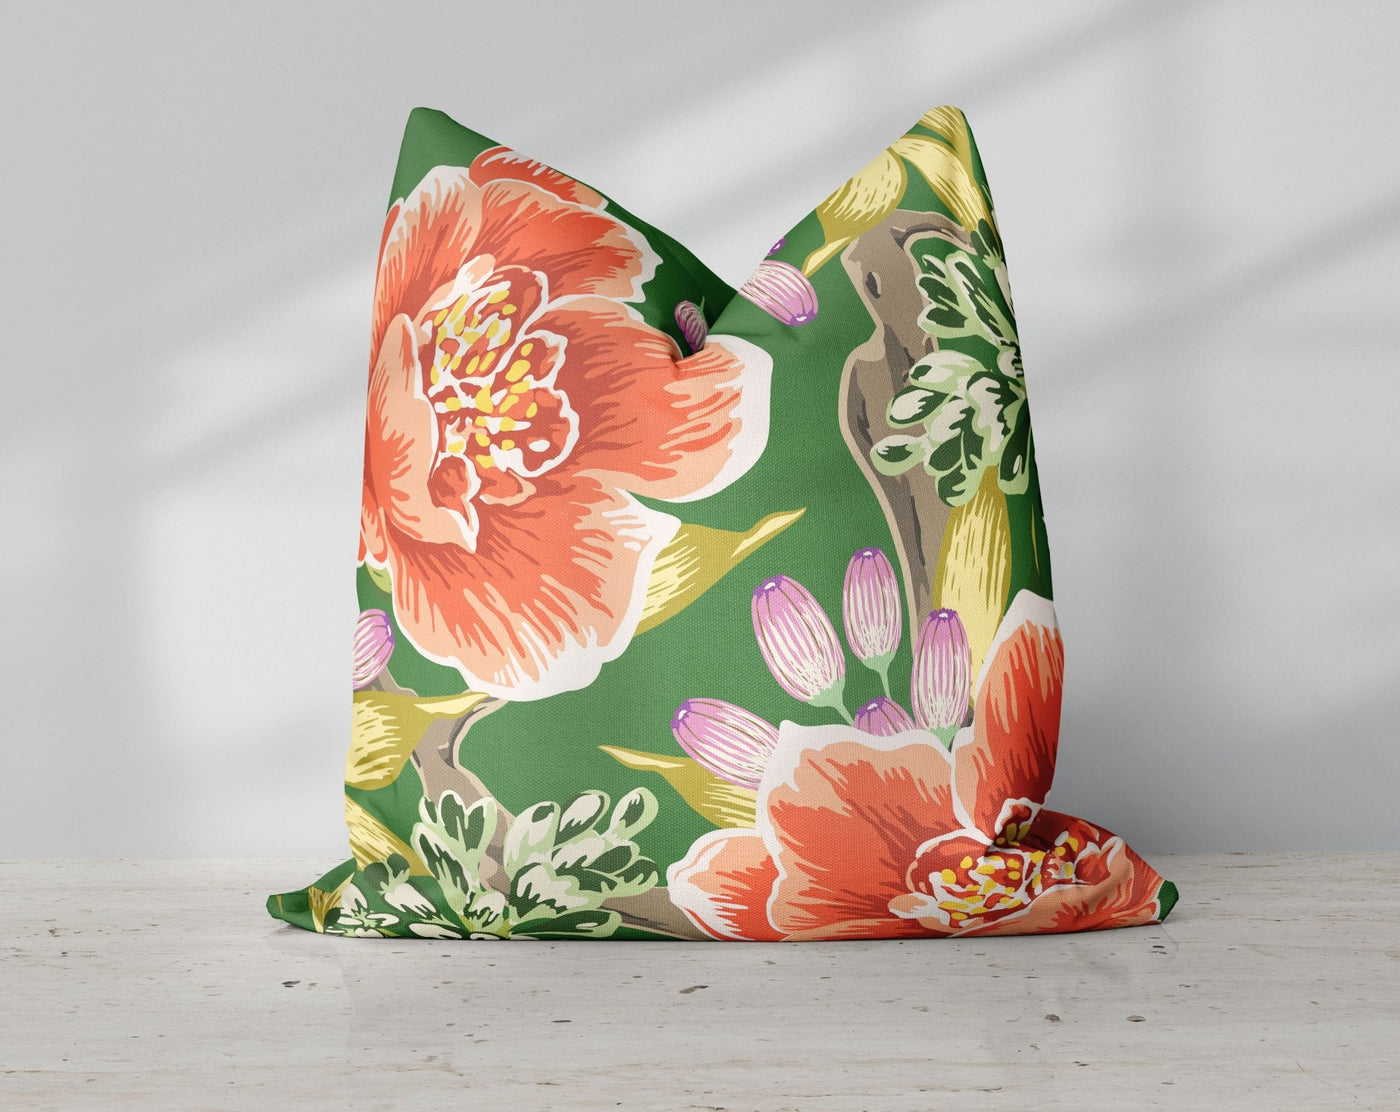 Exclusive Floral Green Thibaut Inspired Pillow Throw Cover with Insert - Cush Potato Pillows